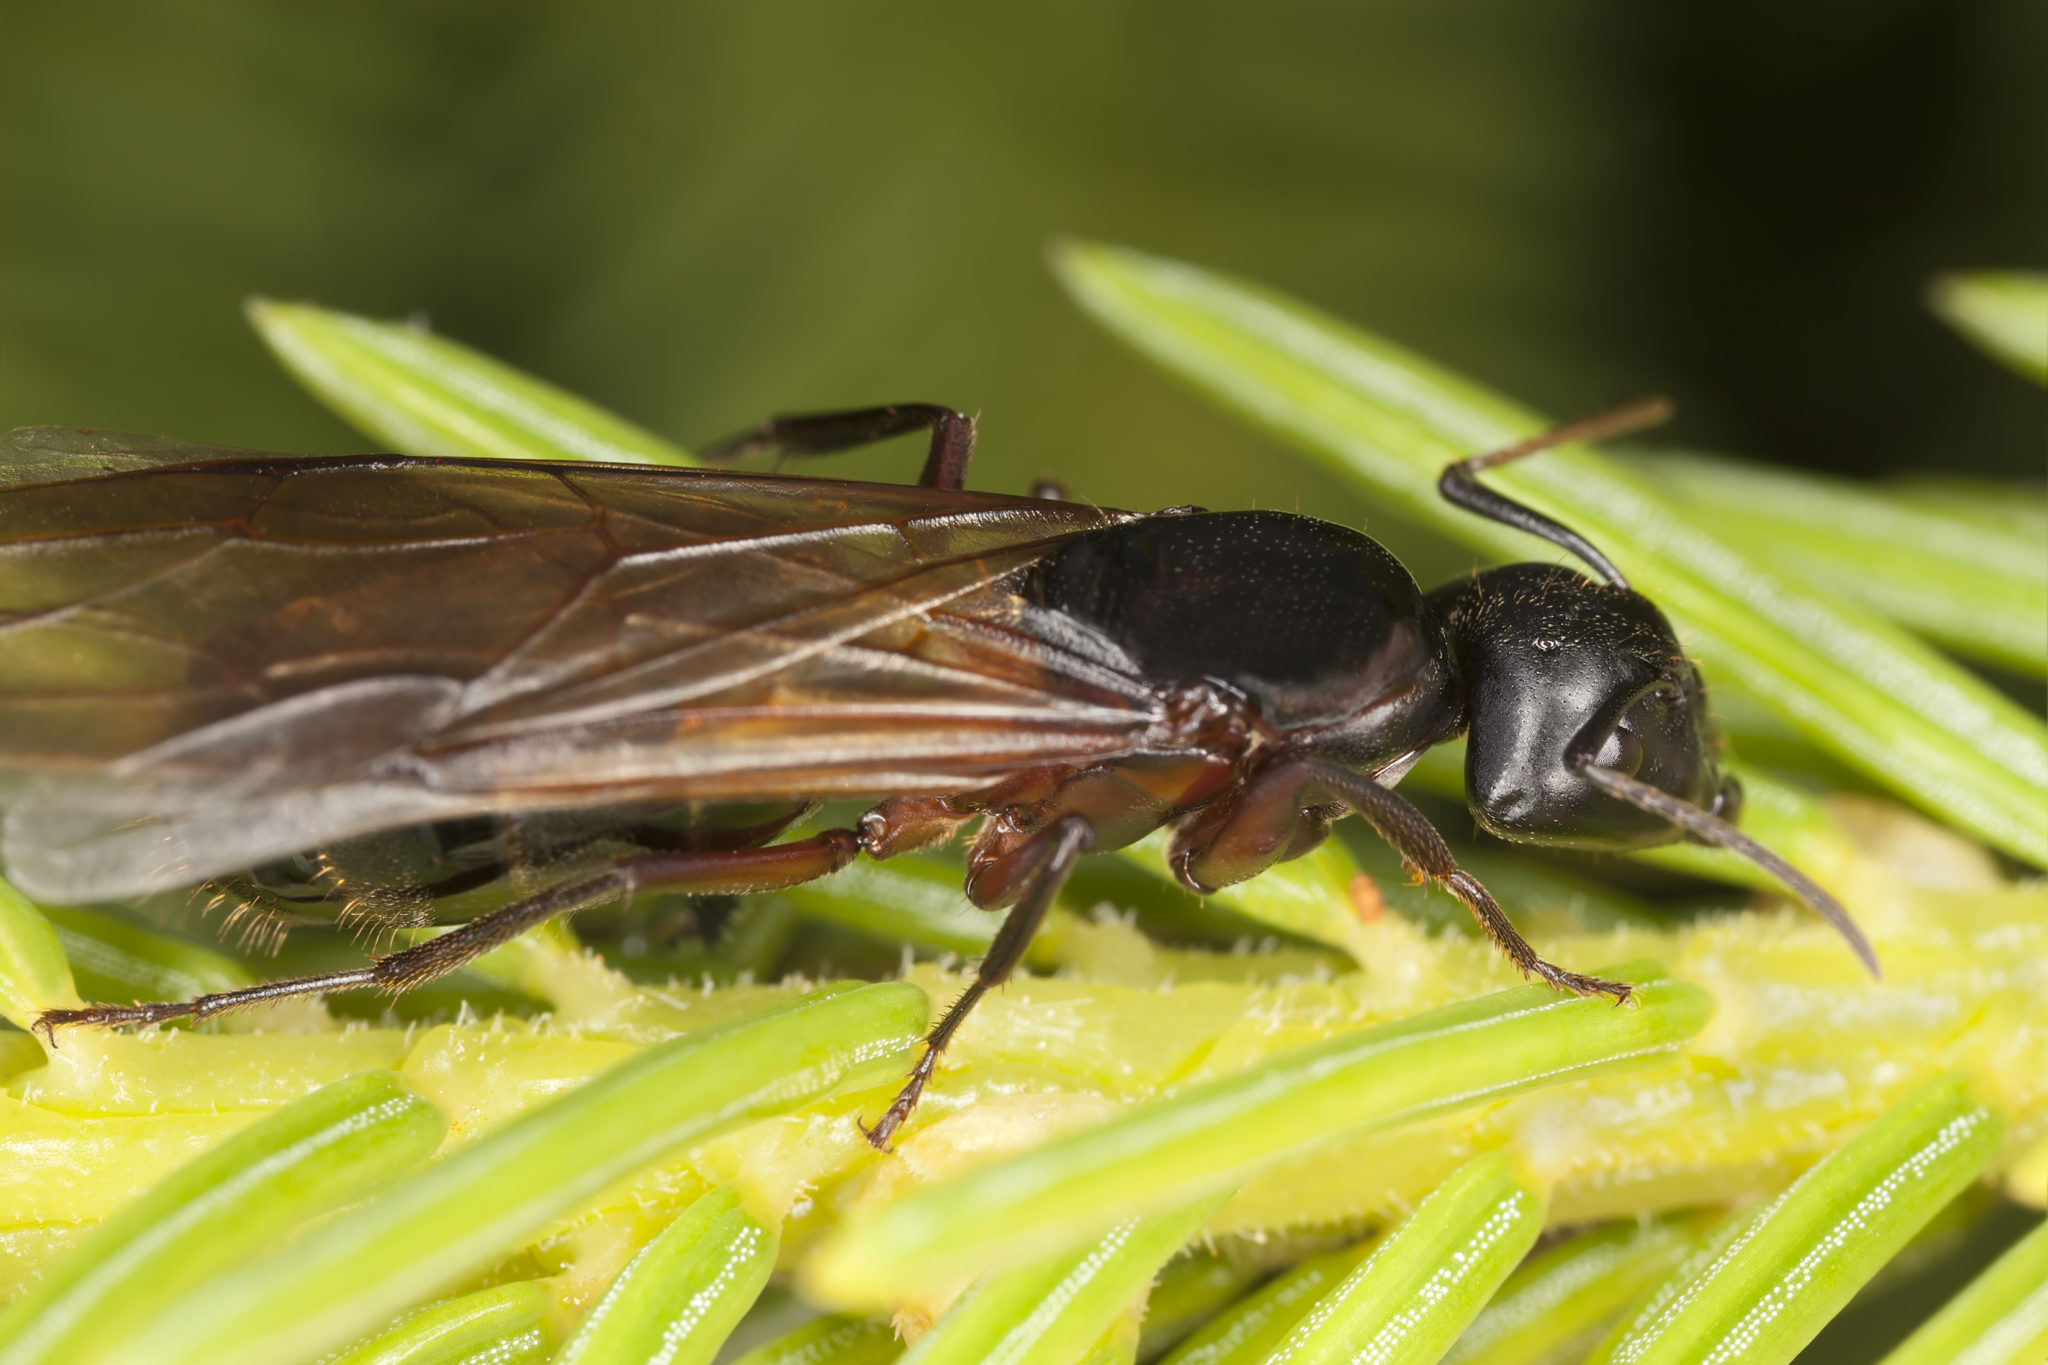 Identifying a Flying Carpenter Ant in Your Home